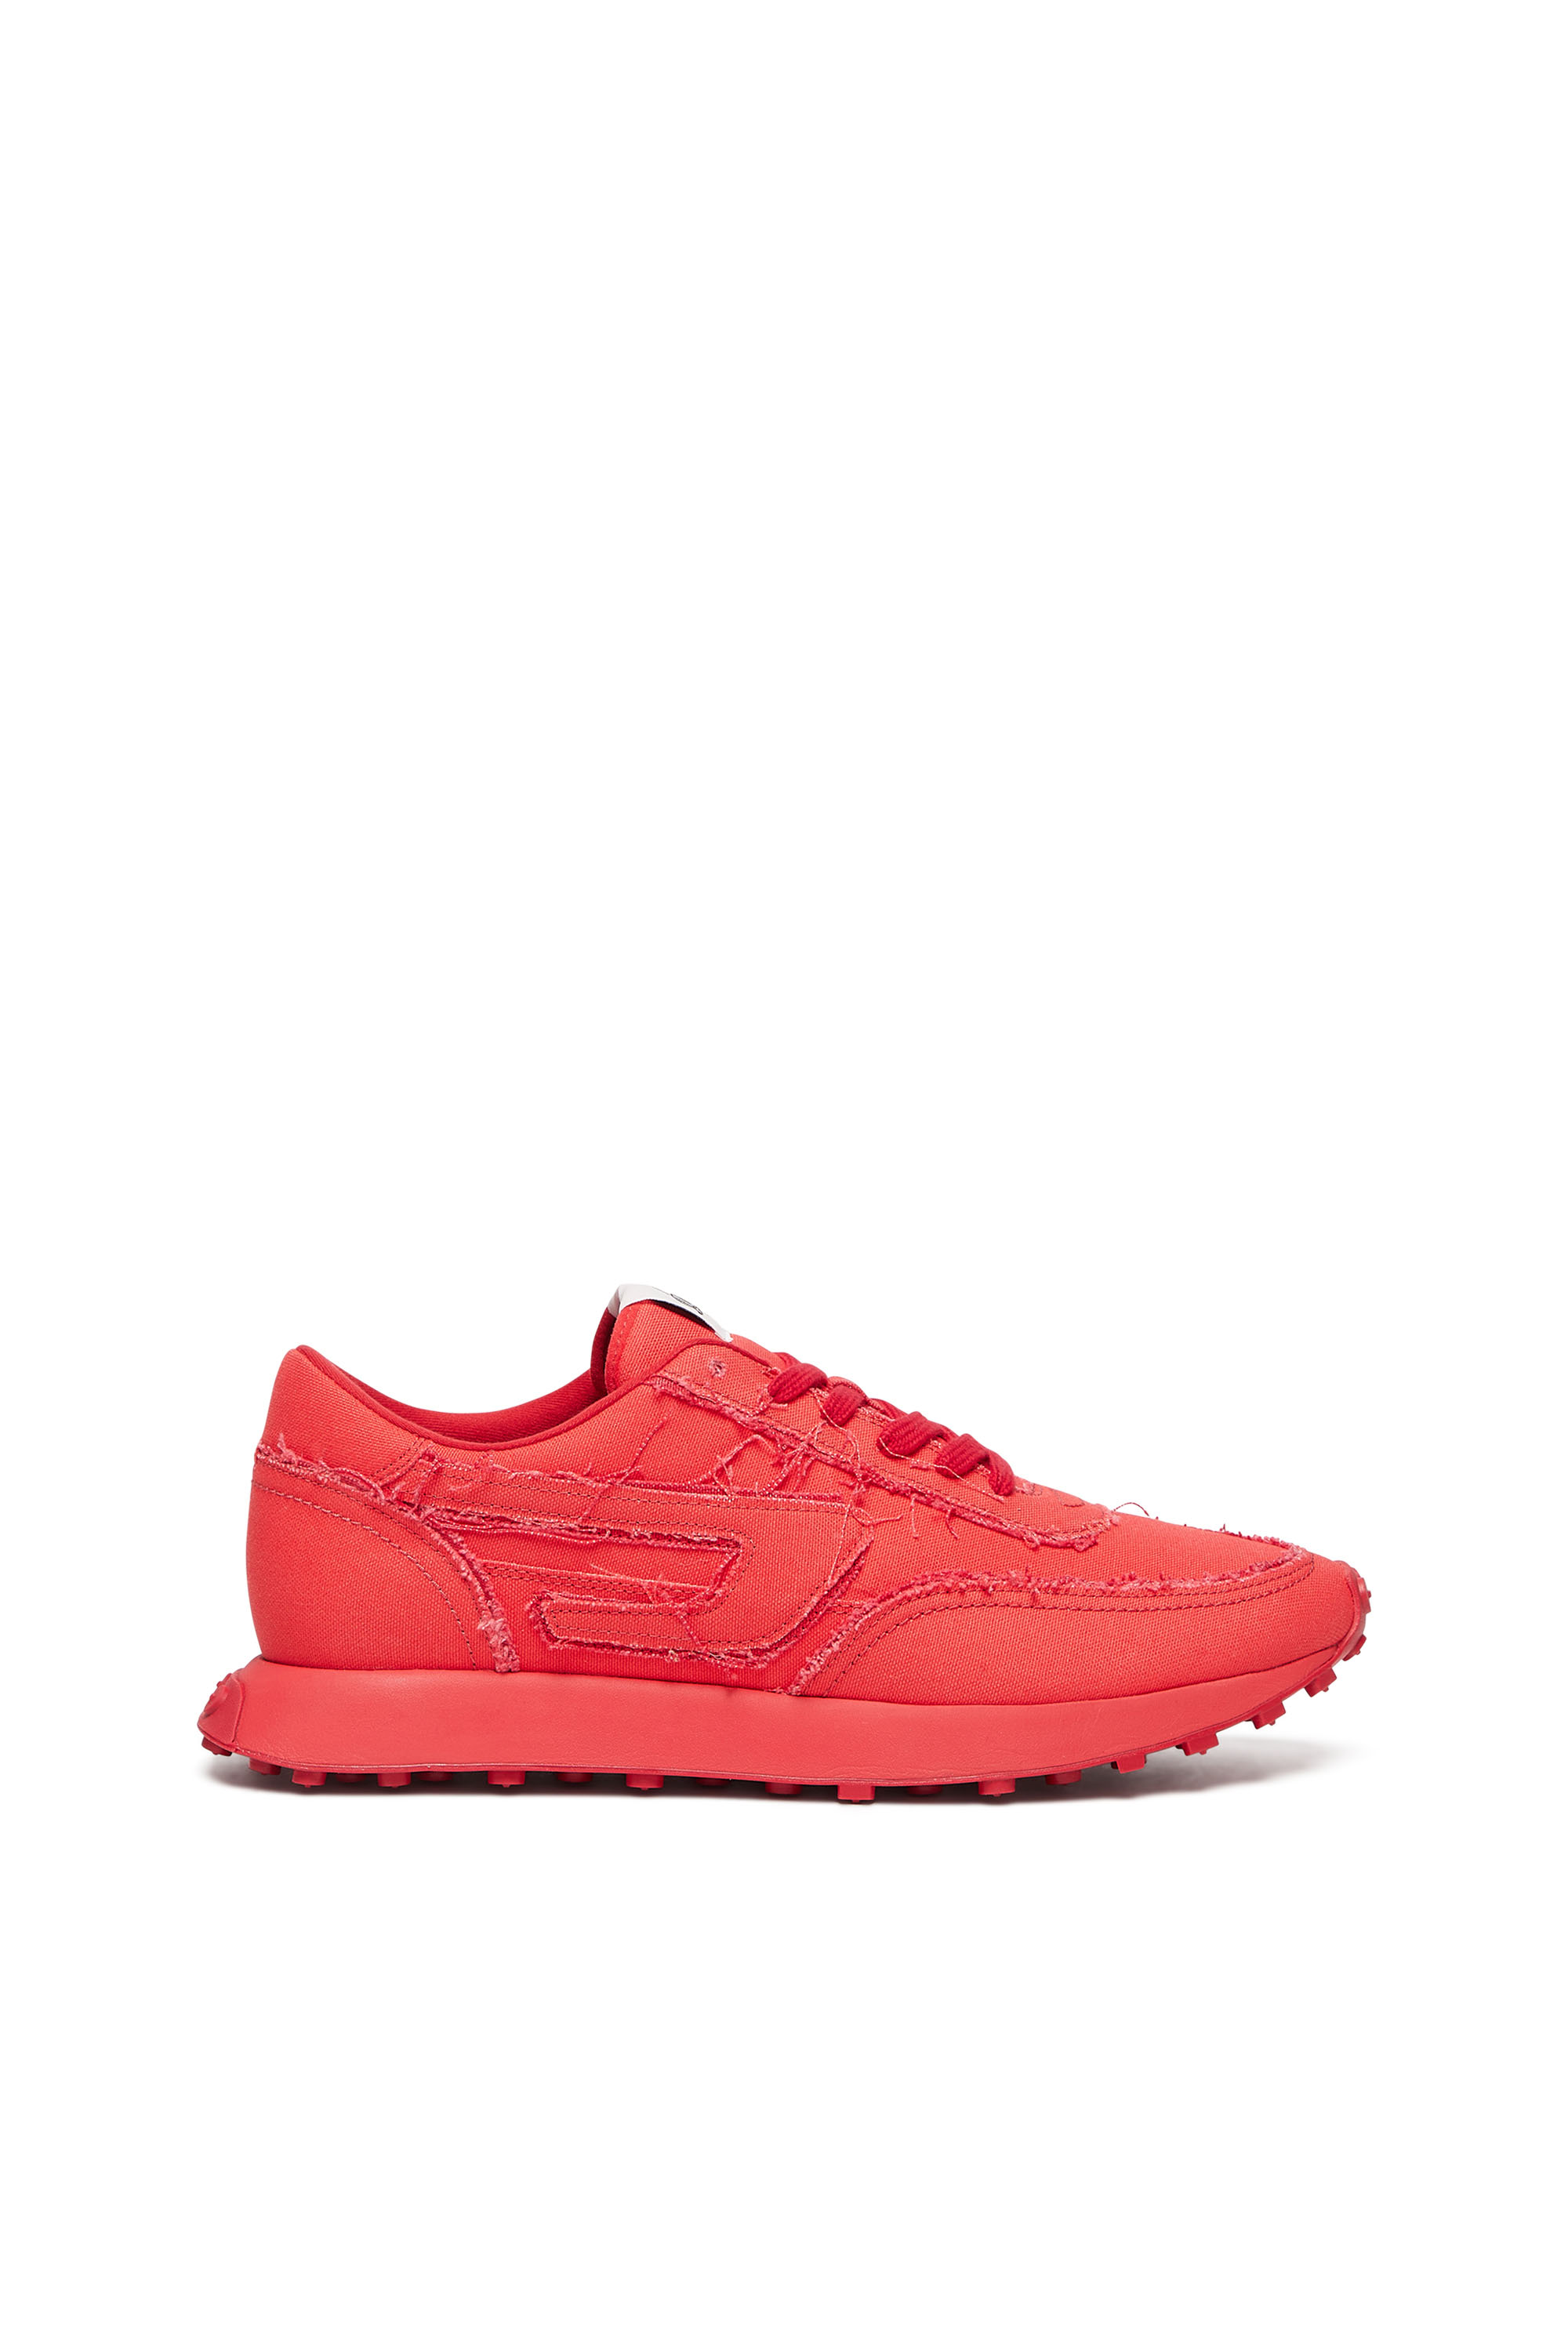 Diesel Canvas Sneakers With Frayed Edges In Red